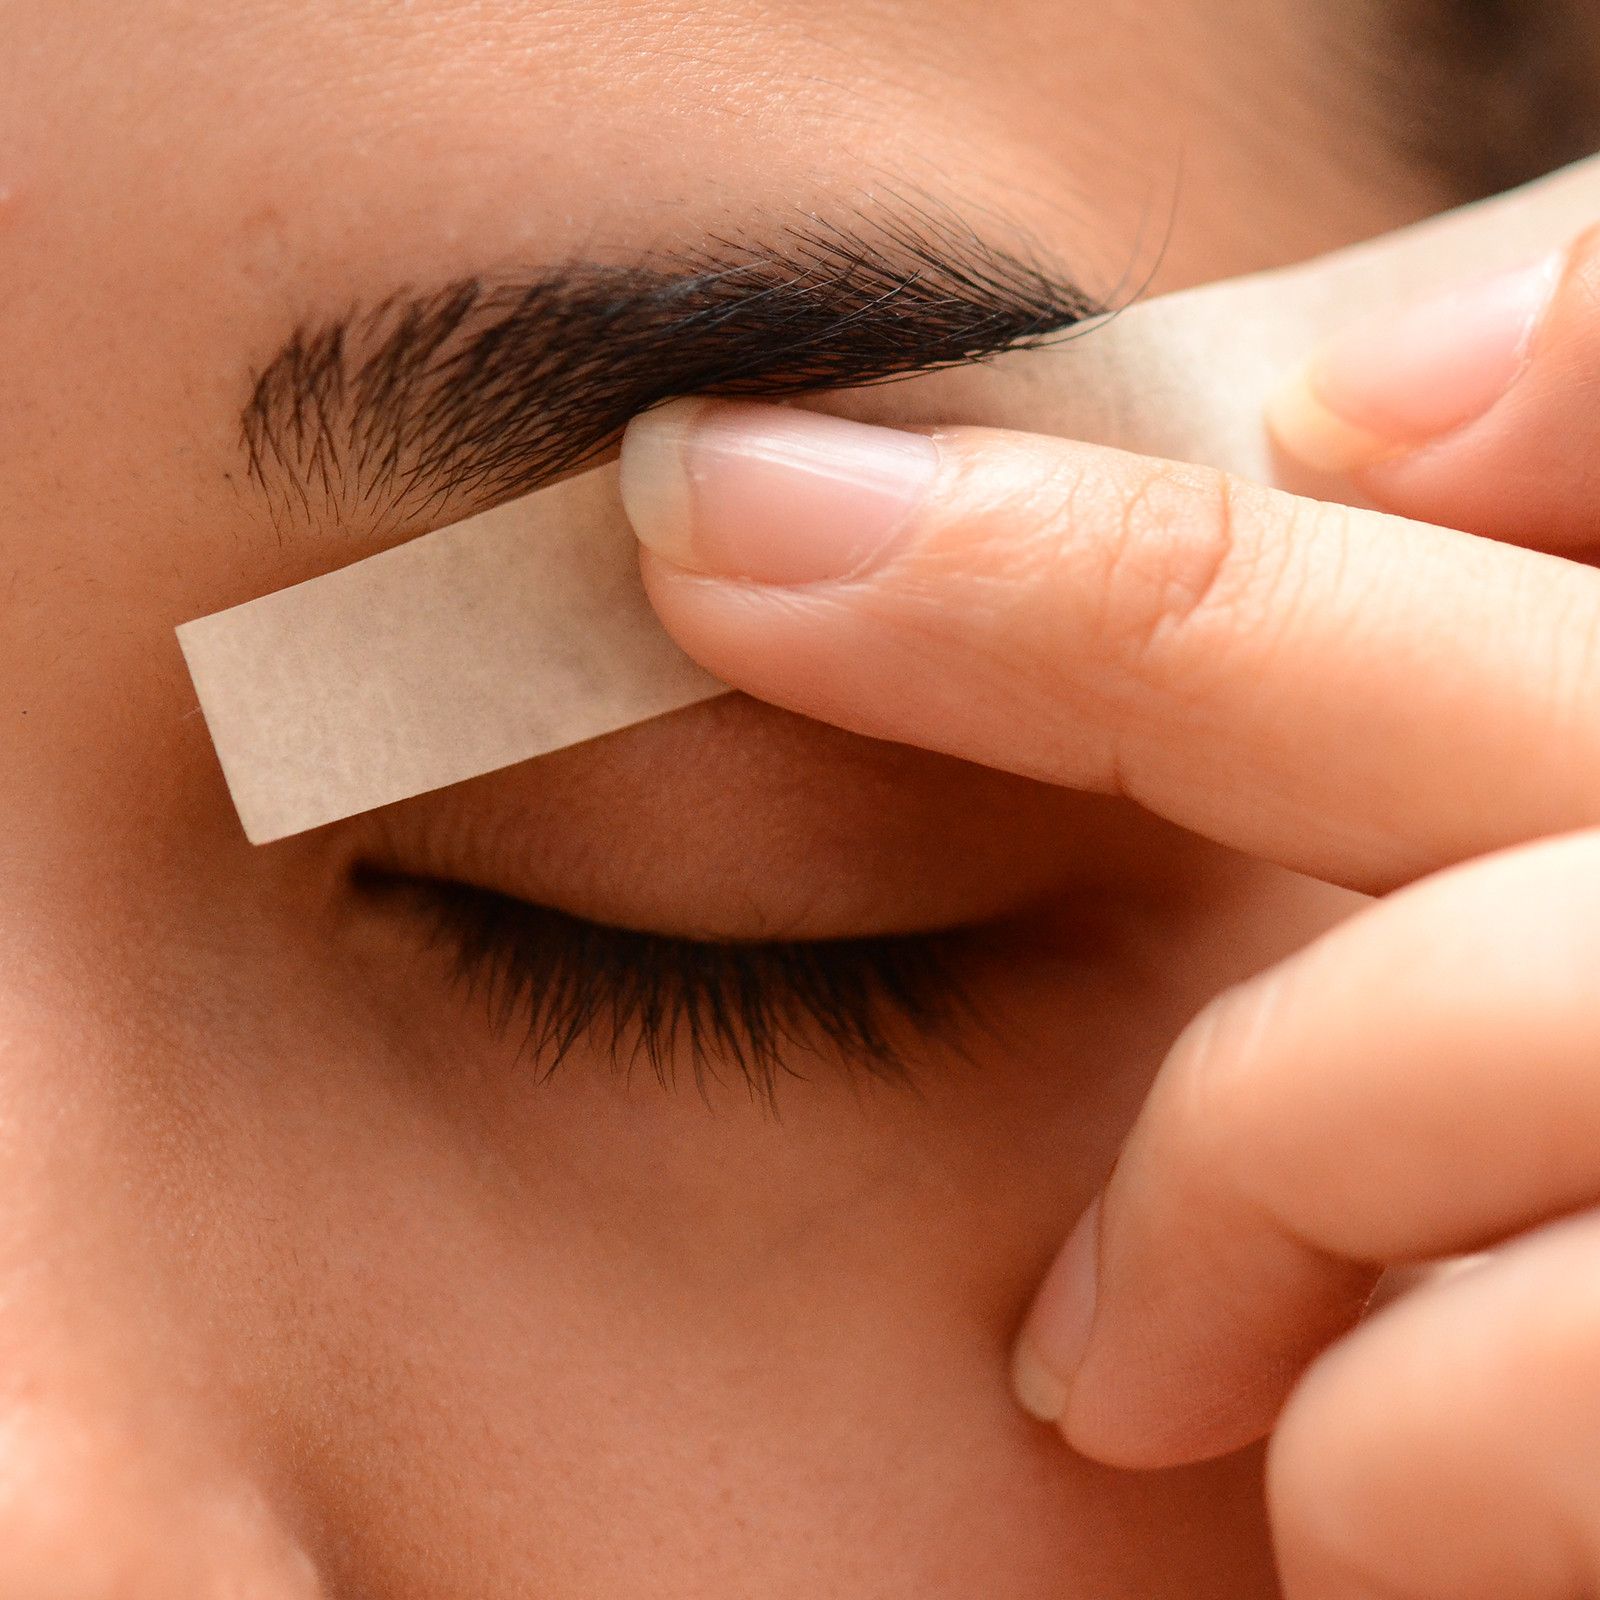 Warm waxing for brows